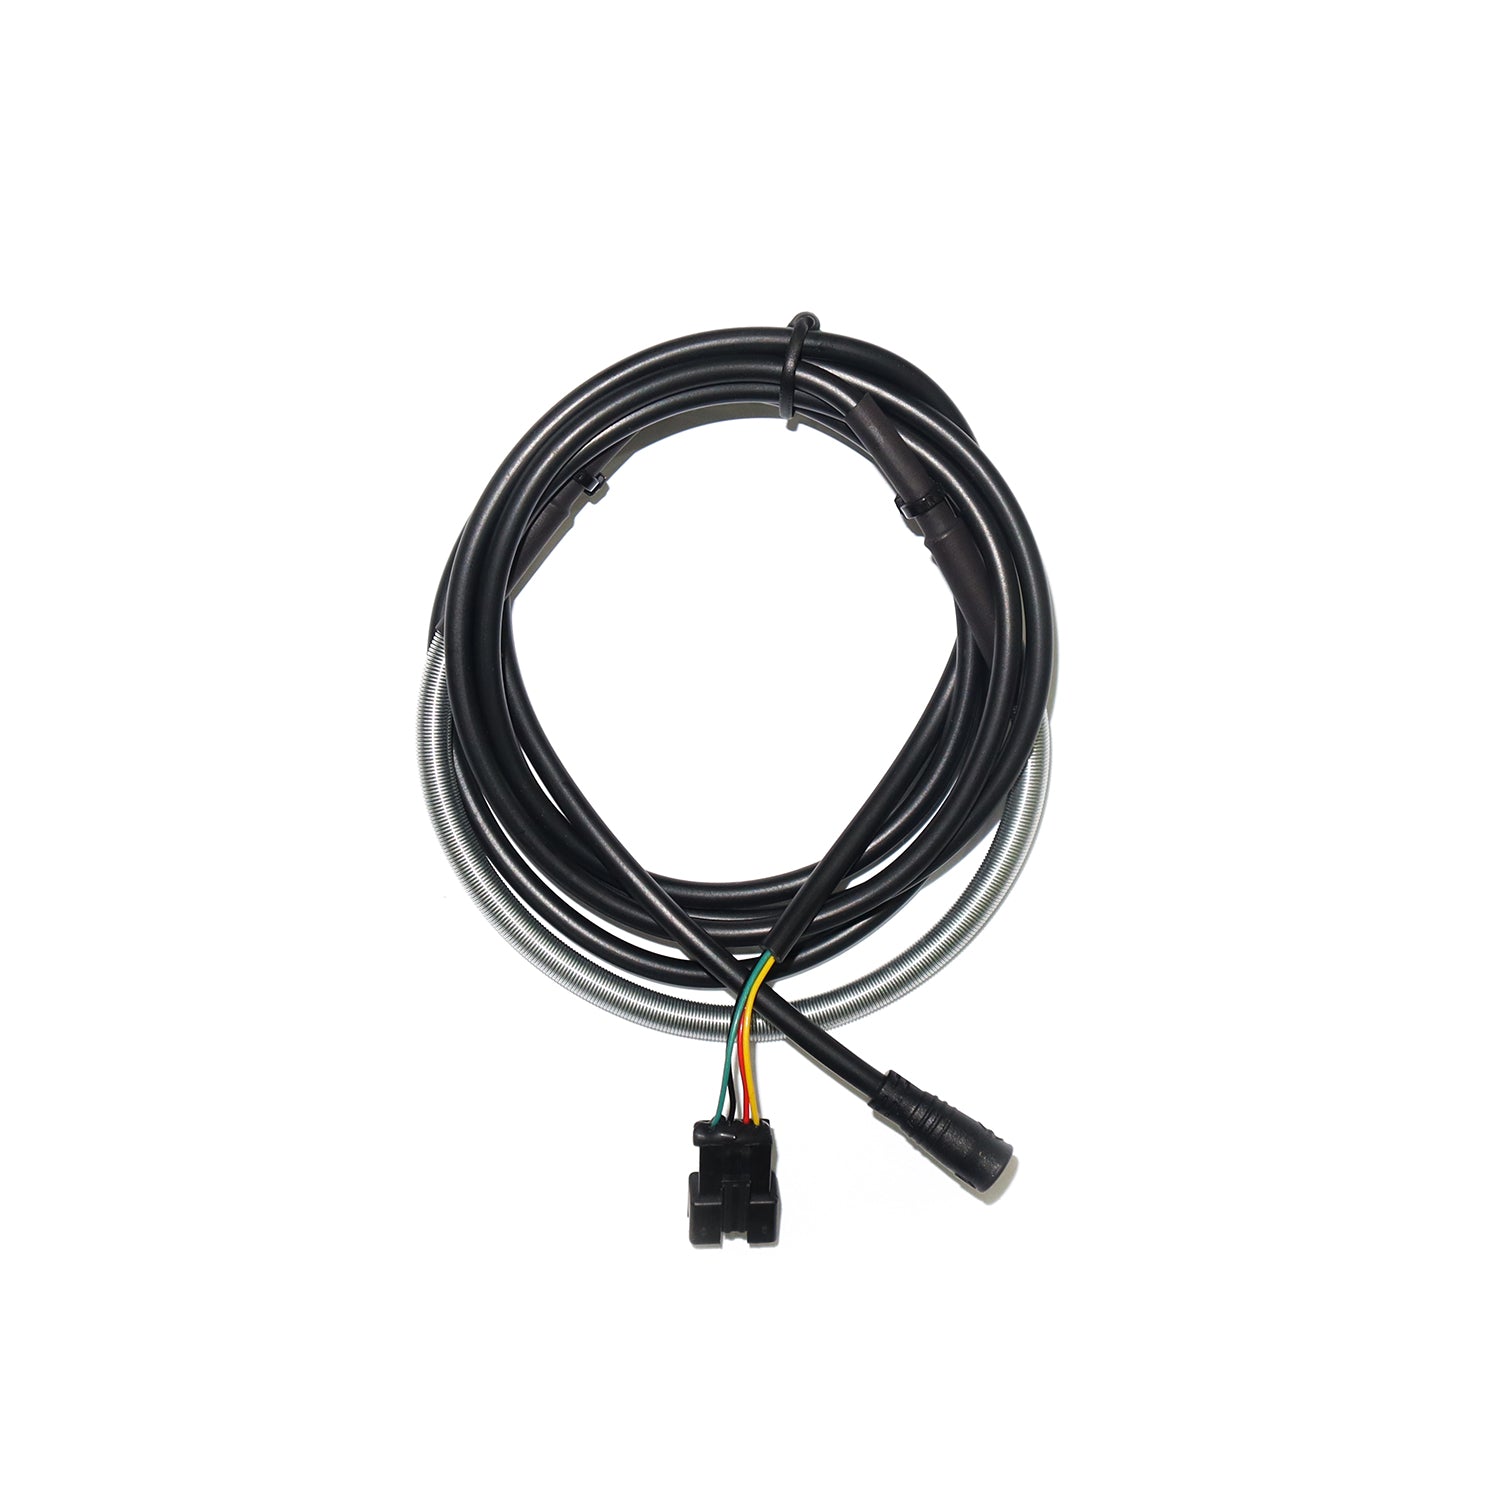 Hiboy S2 MAX Display Controller Cable